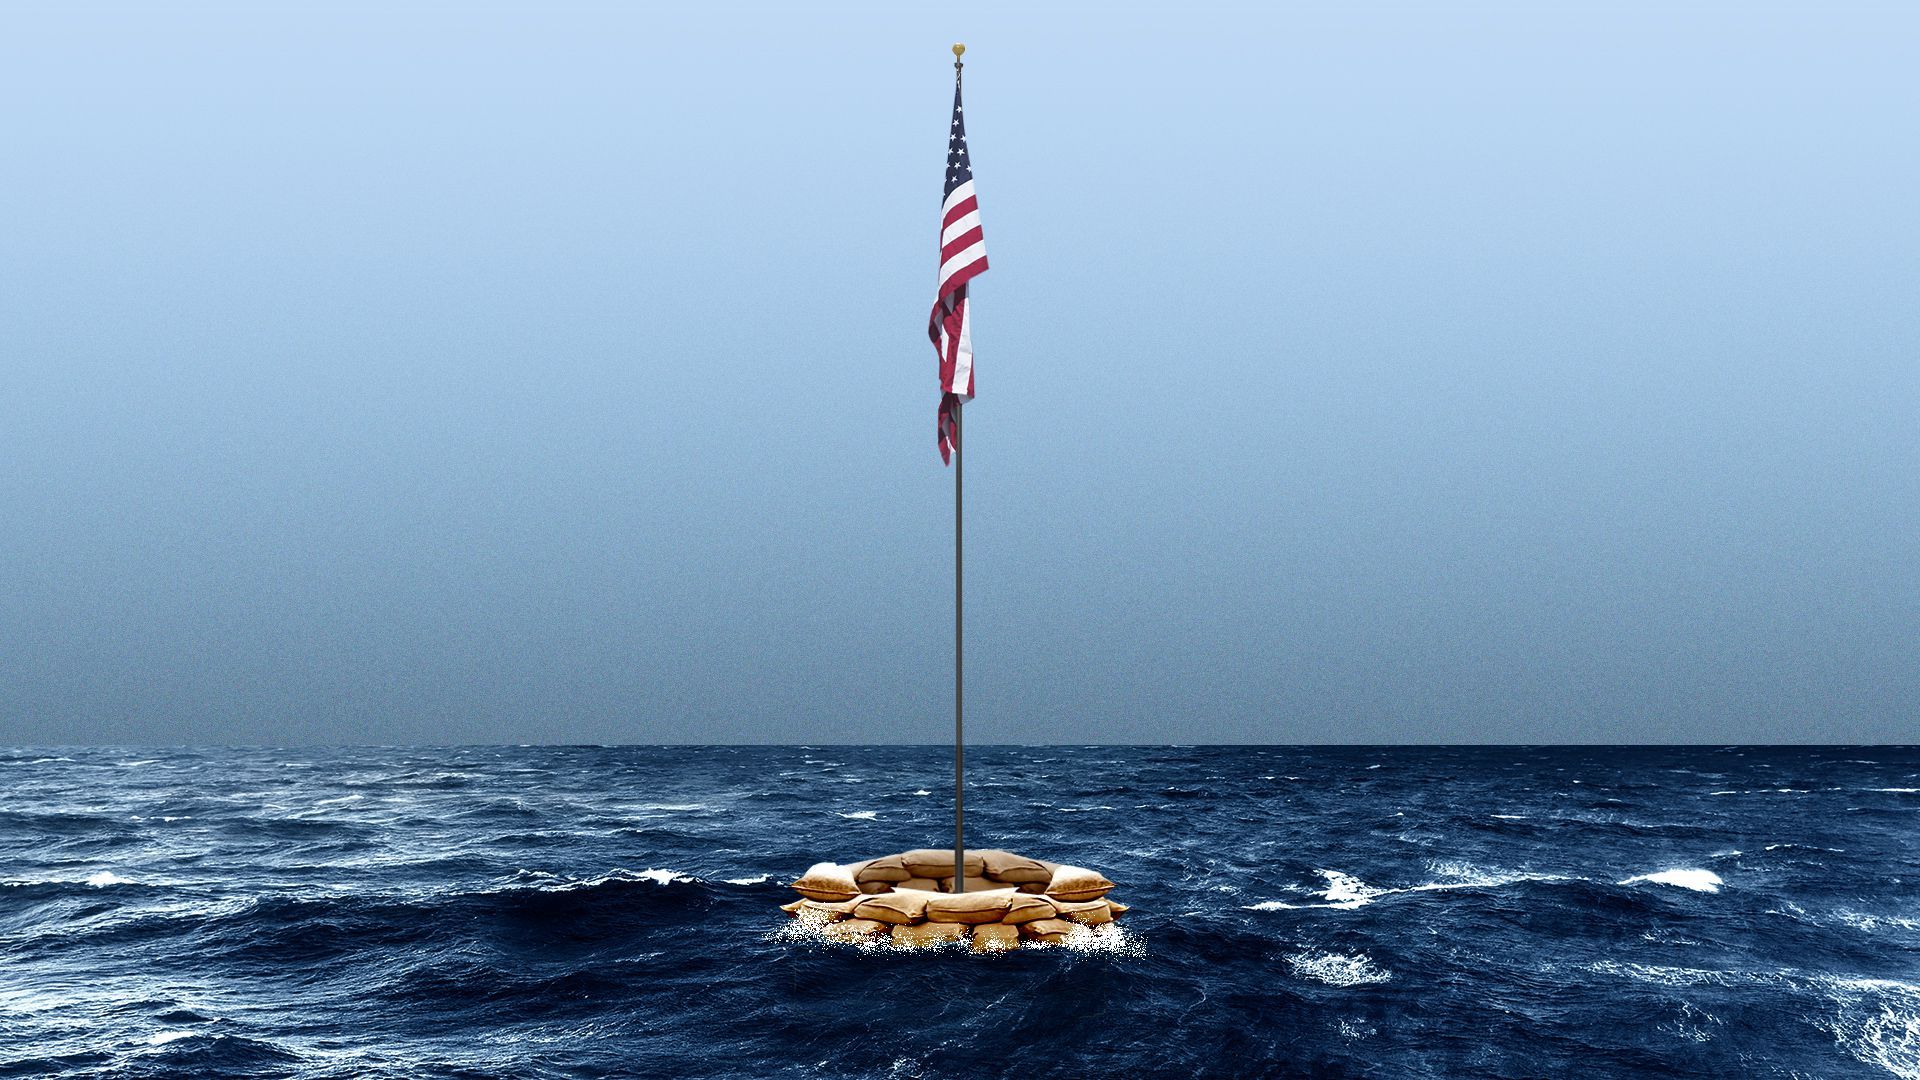 Illustration of an American flag on a flagpole surrounded by sandbags in the middle of a rough ocean with the water about to spill over the sandbags